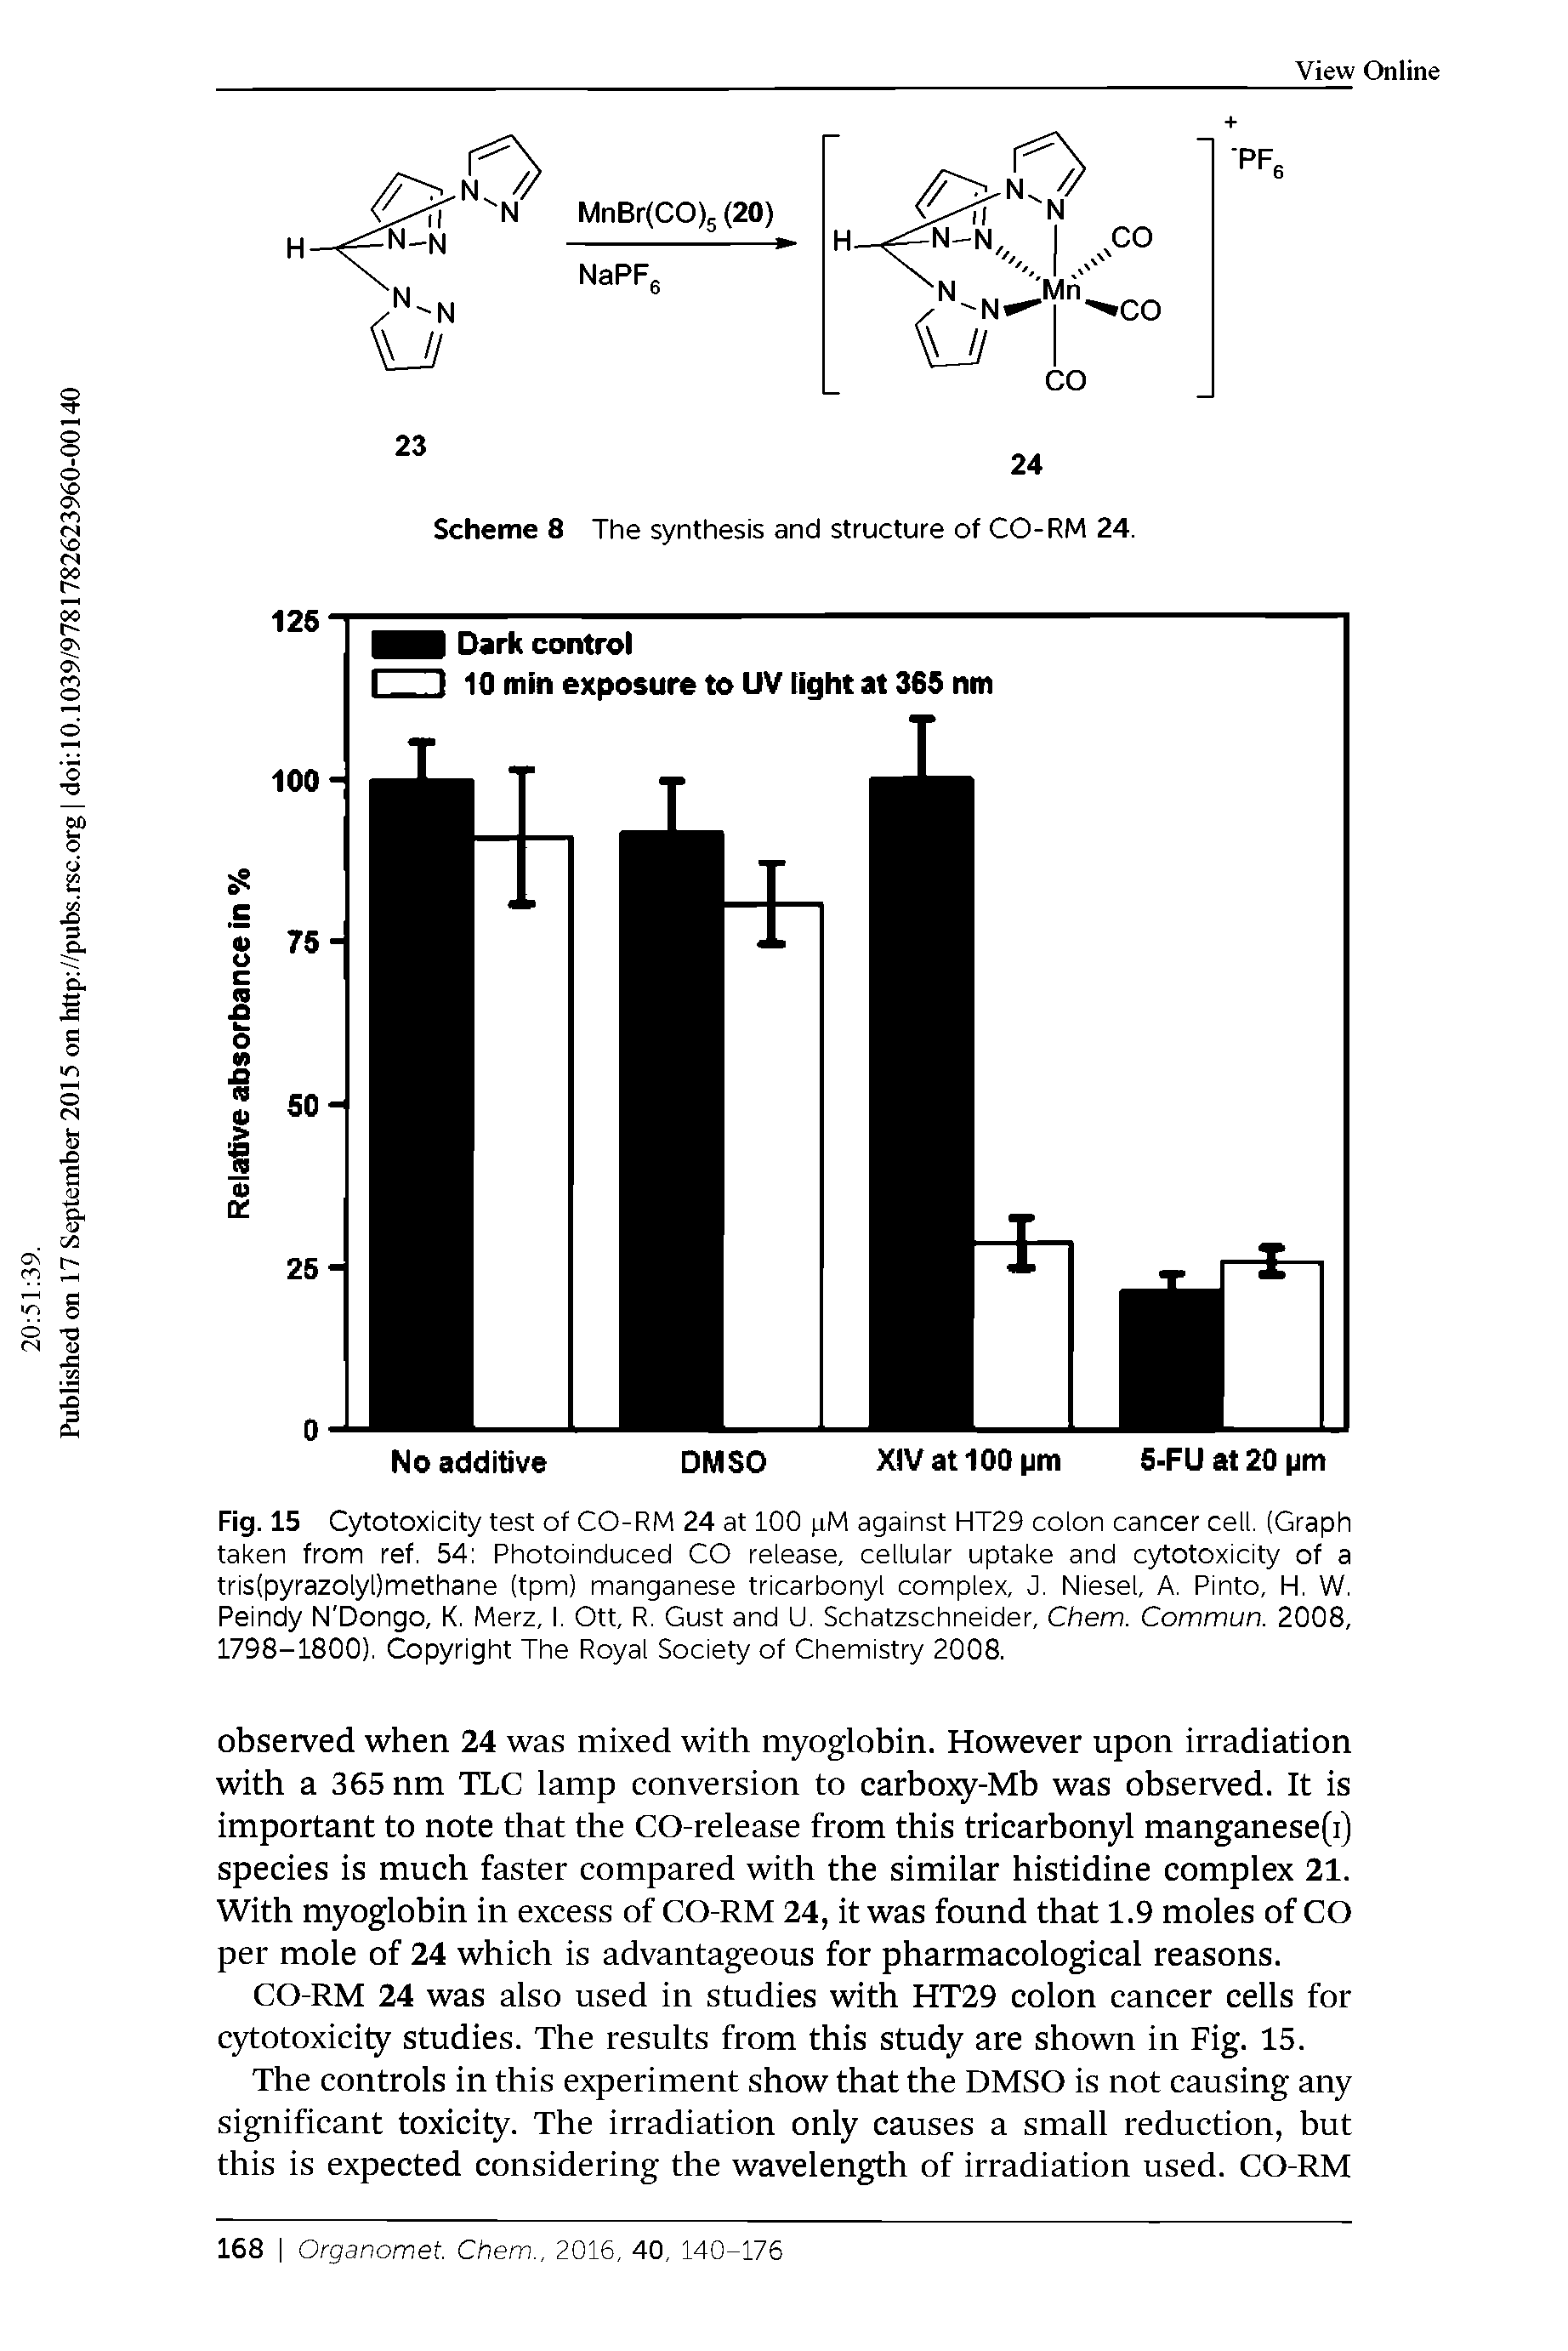 Fig. 15 Cytotoxicity test of CO-RM 24 at 100 iM against HT29 colon cancer cell. (Graph taken from ref. 54 Photoinduced CO release, cellular uptake and cytotoxicity of a tris(pyrazolyl)methane (tpm) manganese tricarbonyl complex, J. Niesel, A. Pinto, H. W. Peindy N Dongo, K. Merz, 1. Ott, R. Gust and U. Schatzschneider, Chem. Commun. 2008, 1798-1800). Copyright The Royal Society of Chemistry 2008.